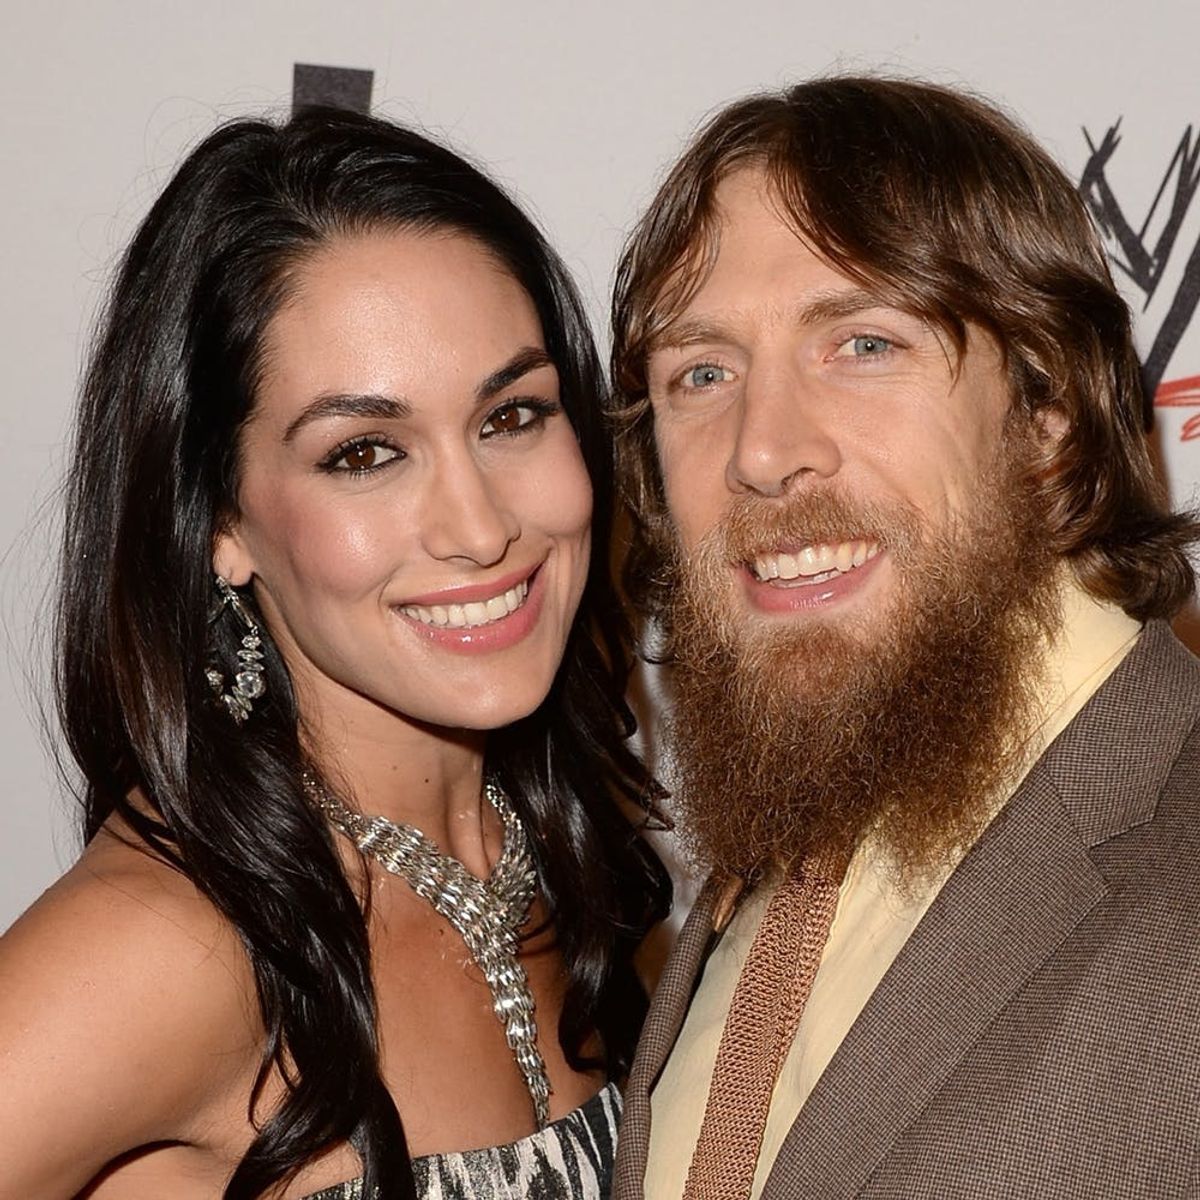 Brie Bella and Daniel Bryan Are Planning for Baby No. 2